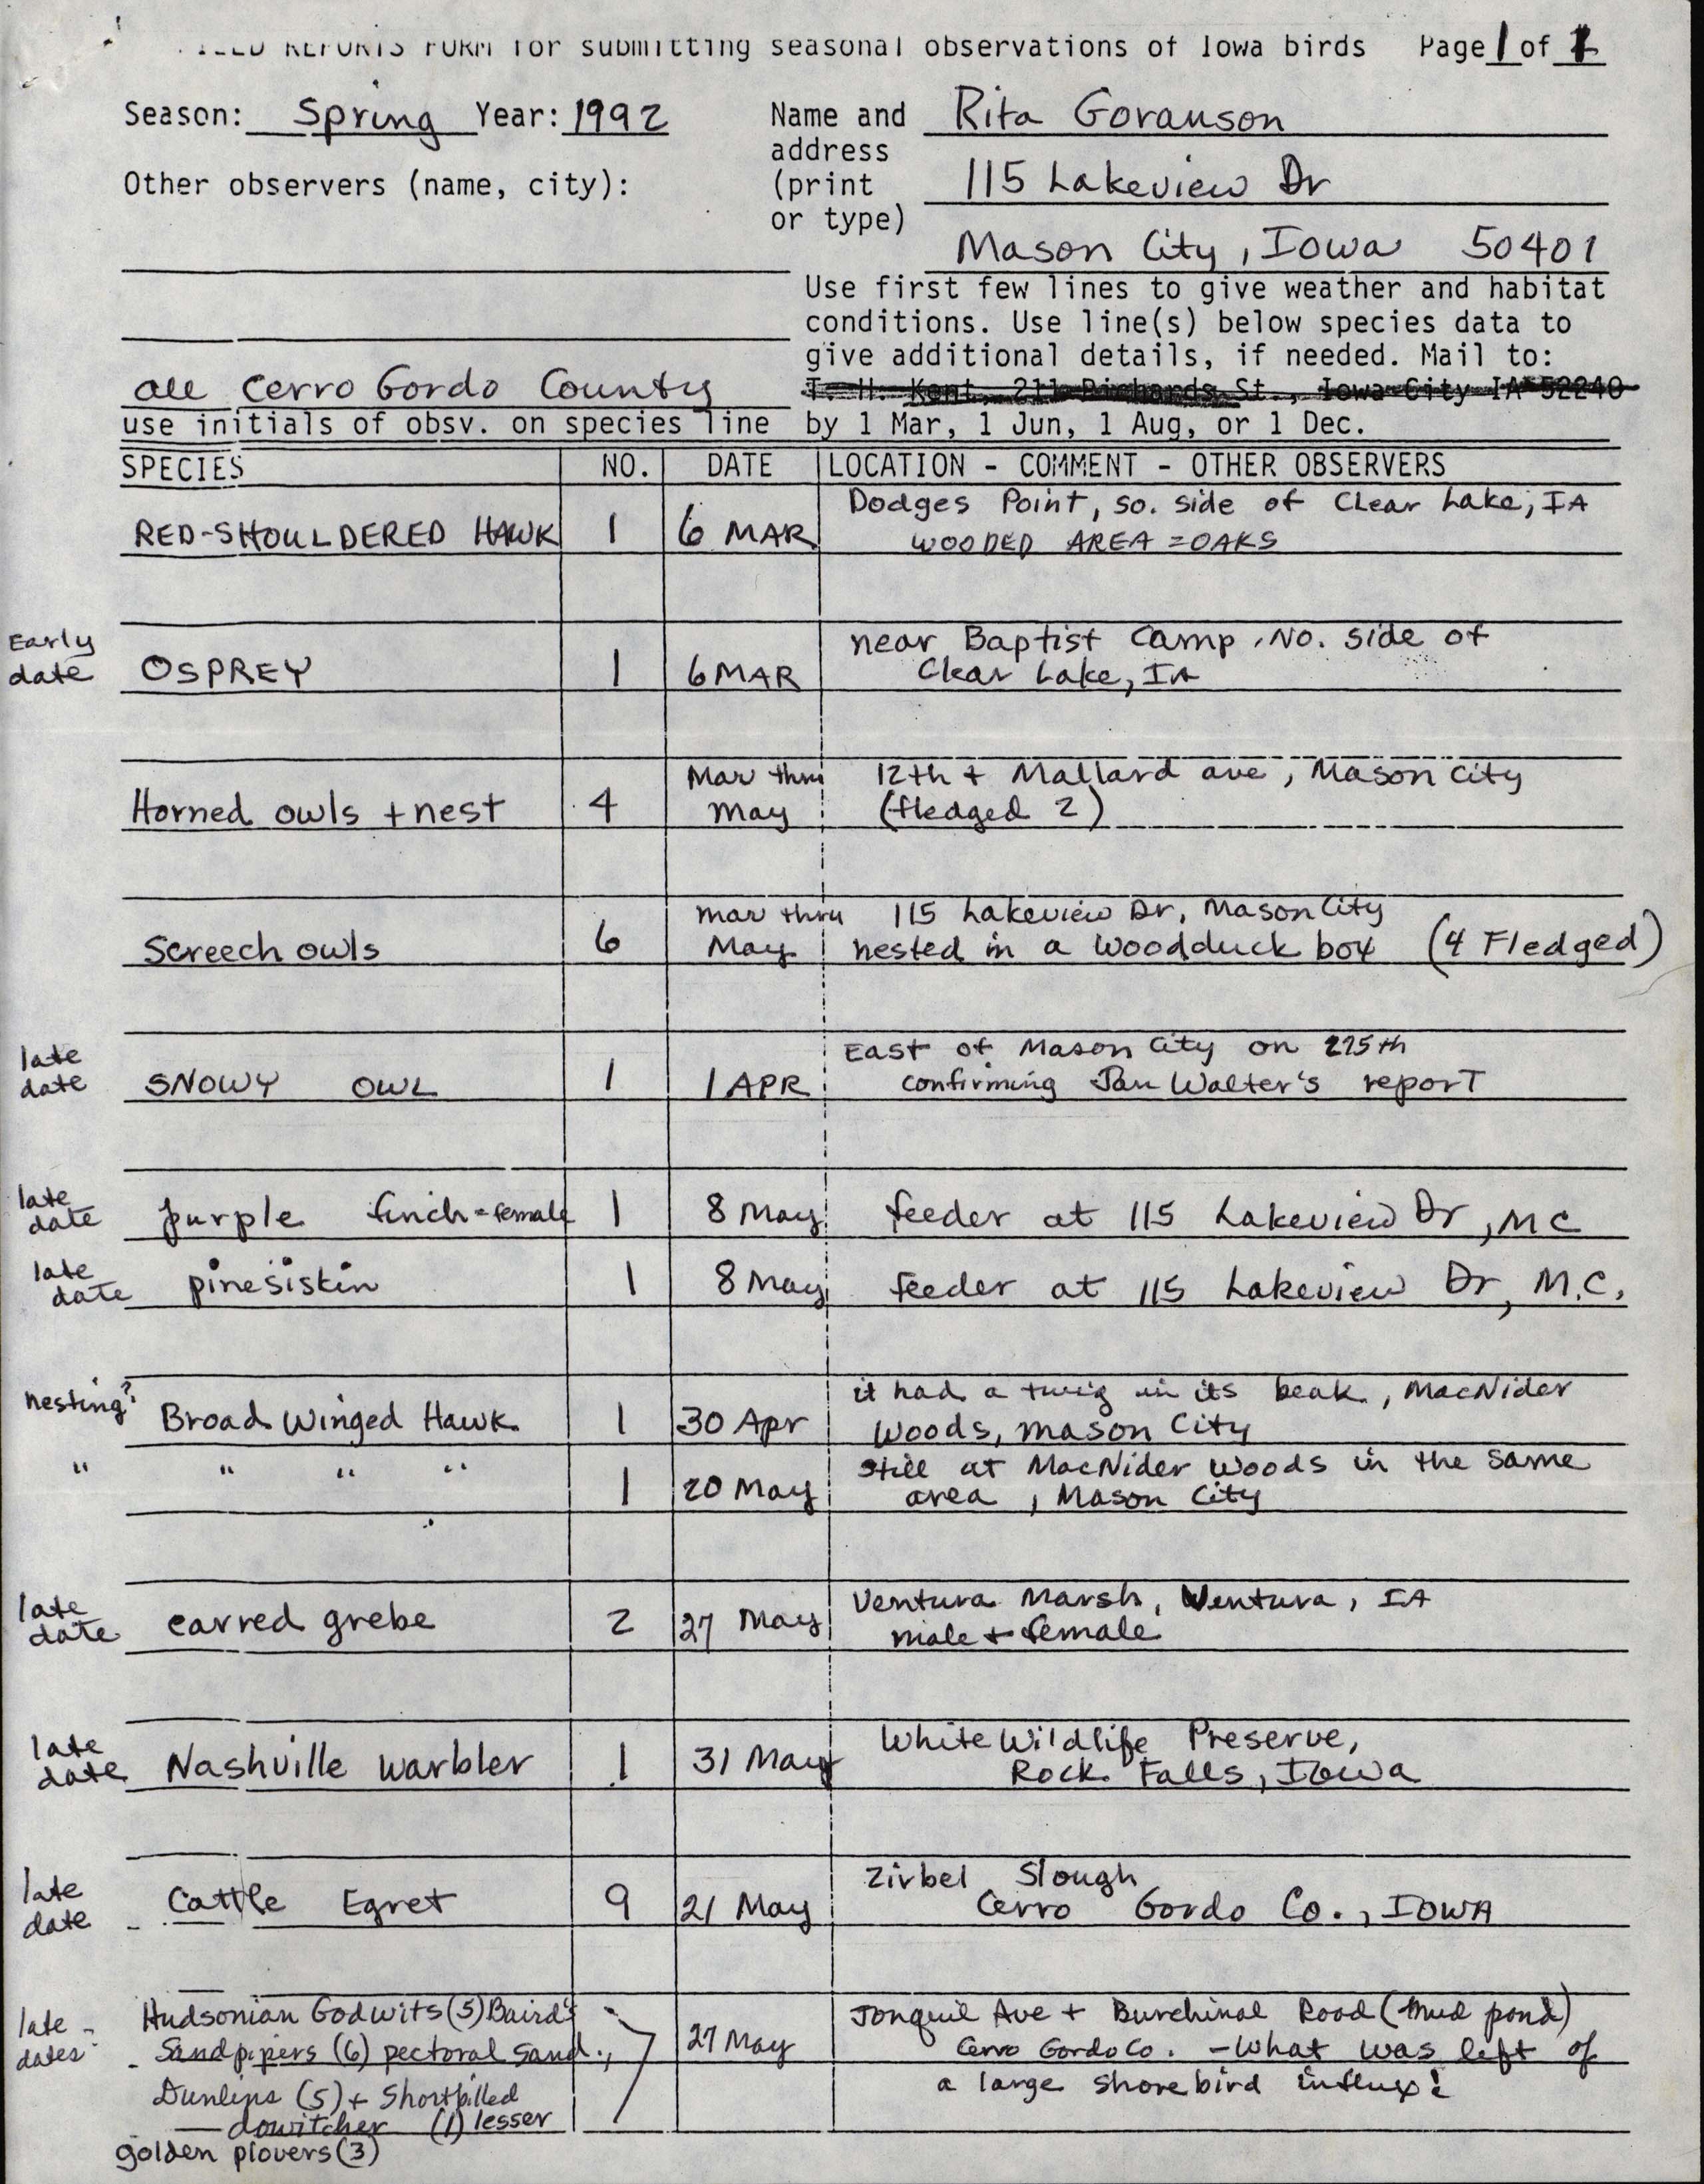 Field reports form for submitting seasonal observations of Iowa birds, Rita Goranson, spring 1992